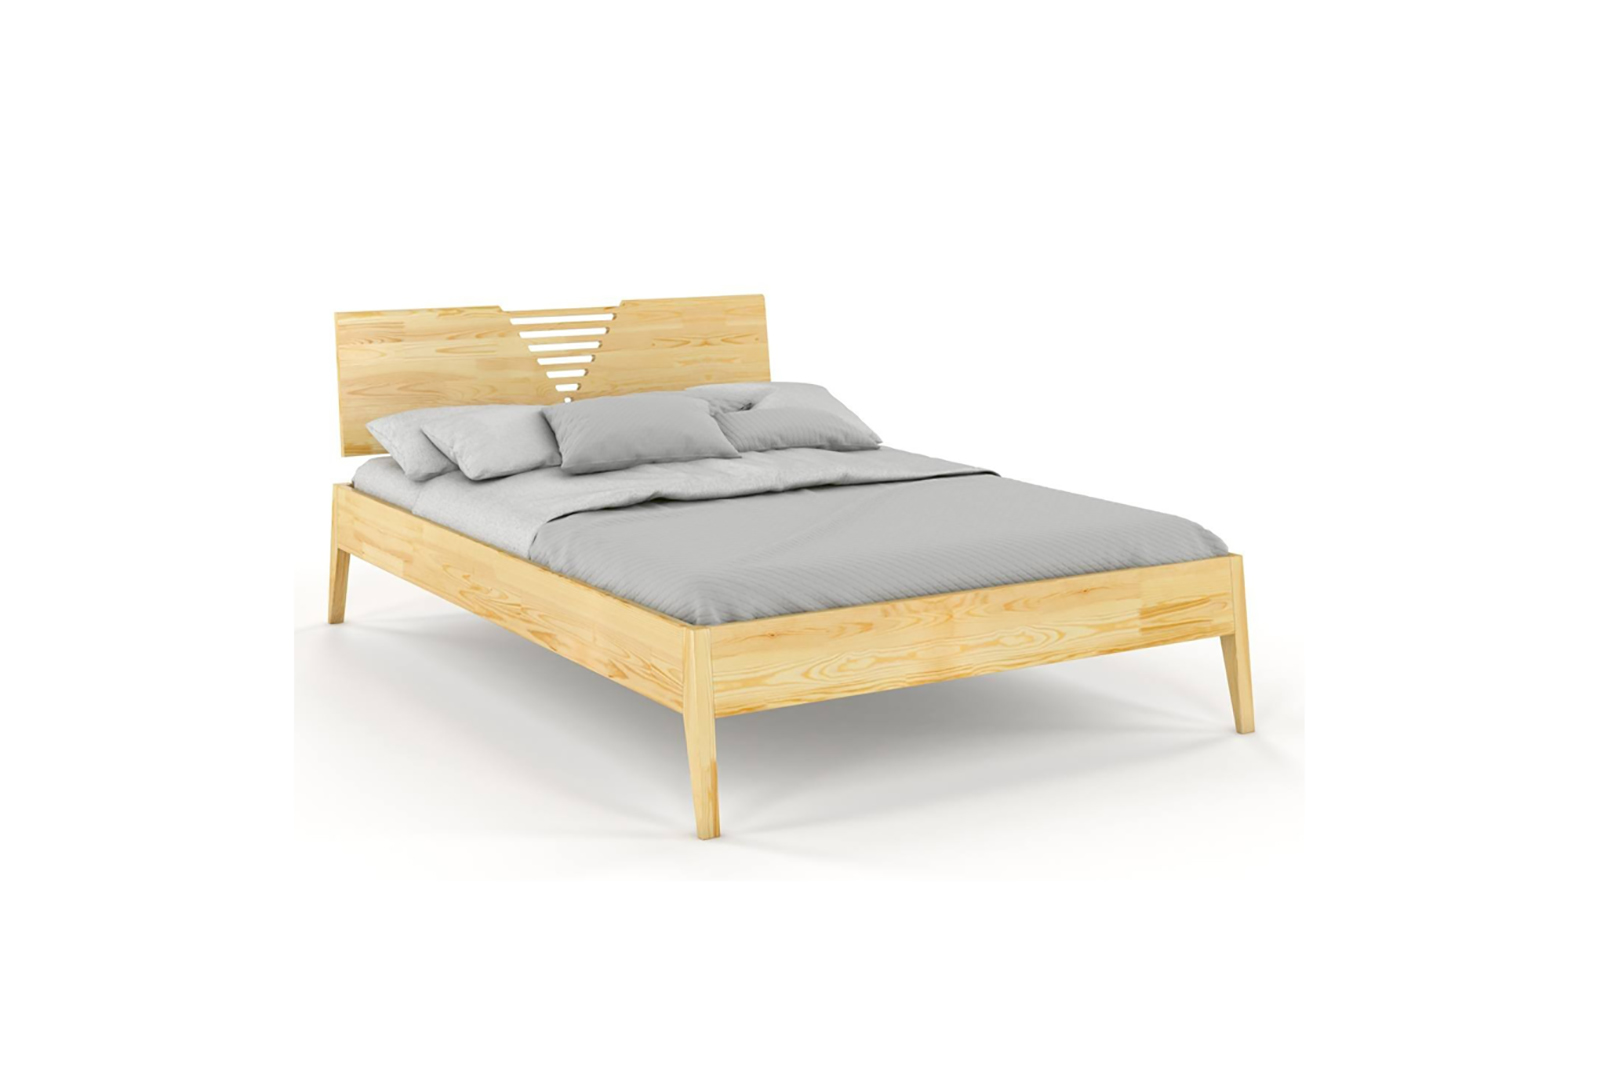 VISBY WOLOMIN WOODEN PINE BED